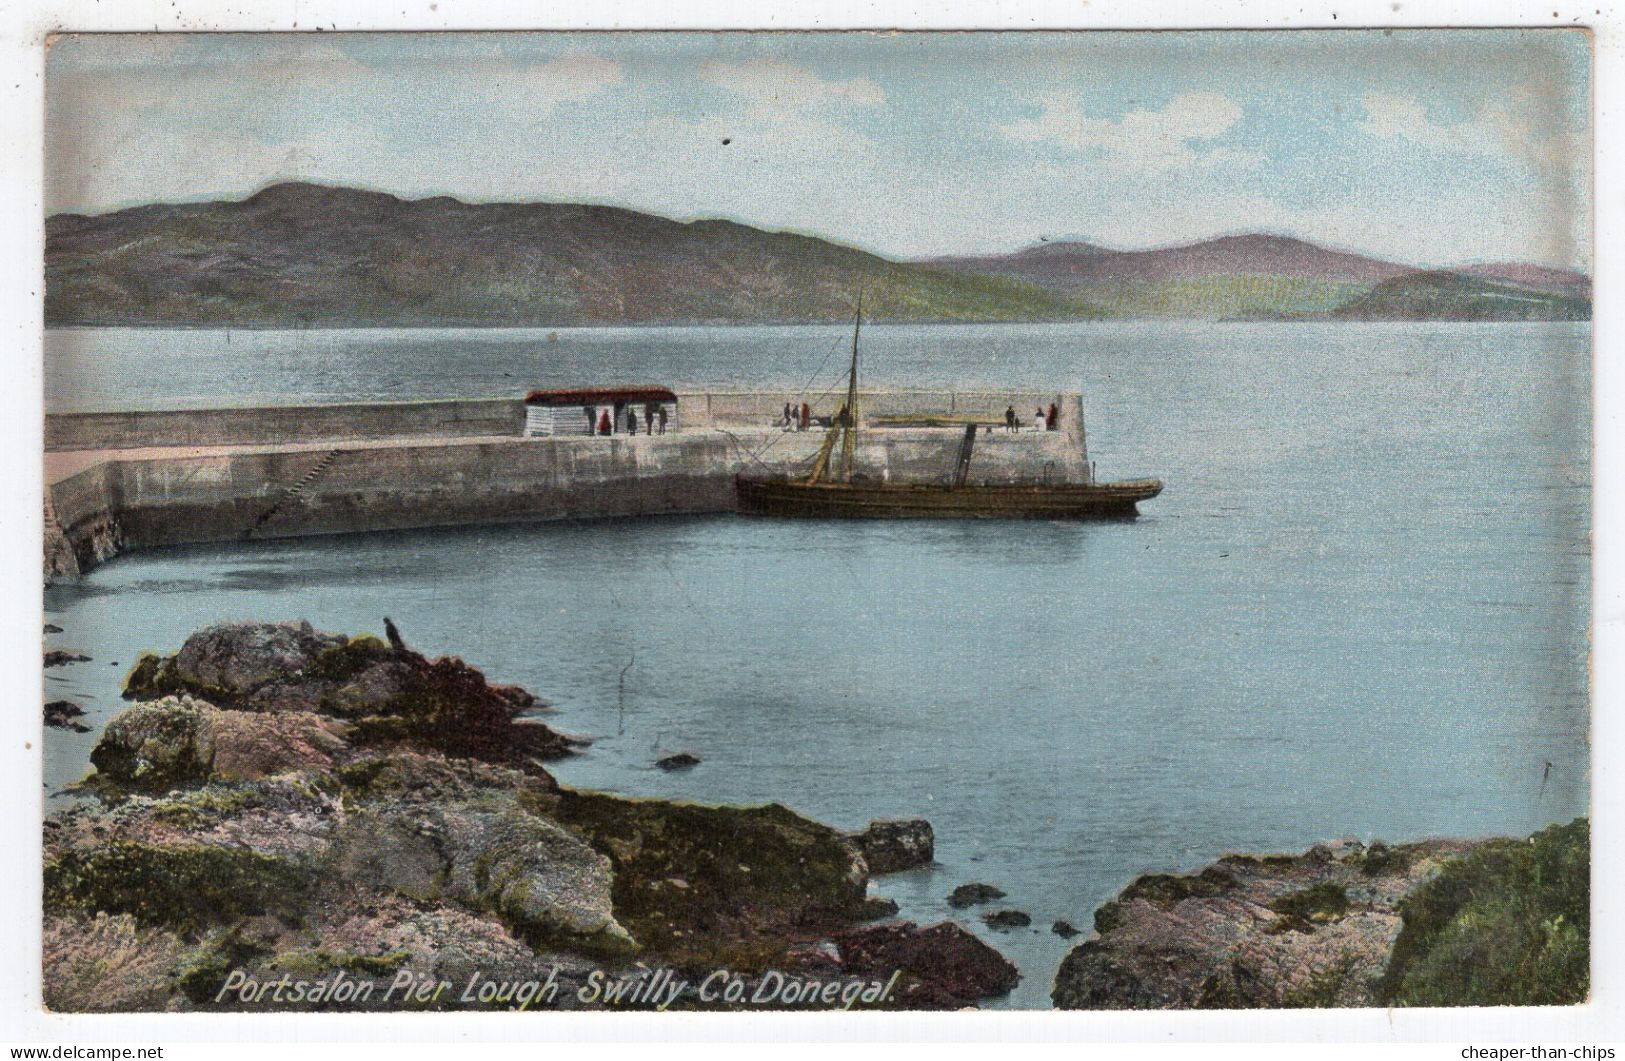 PORTSALON PIER, Lough Swilly - Lawrence - Donegal